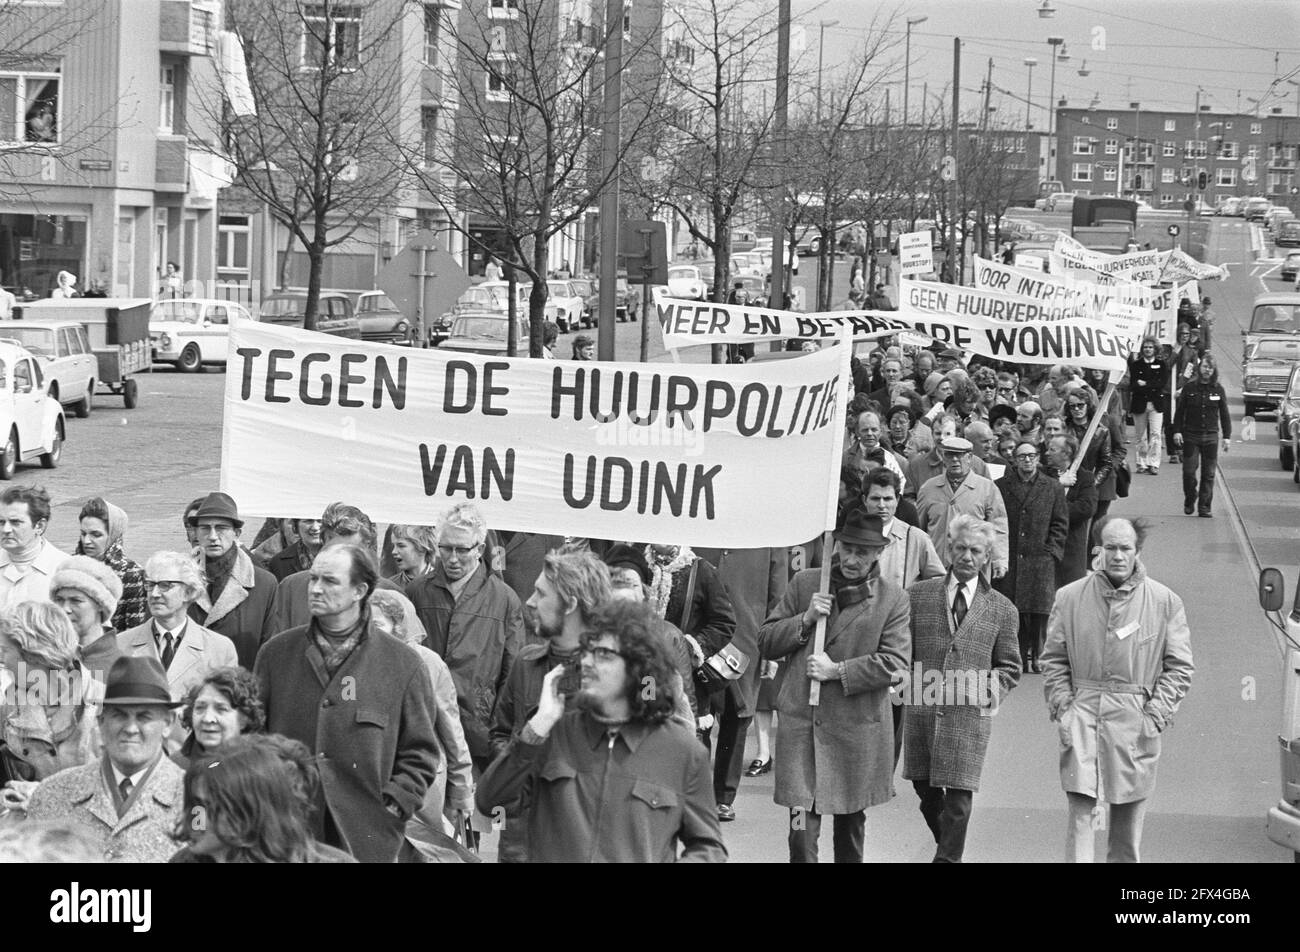 Demonstration in Amsterdam against housing policy and rent harmonization; banner against Minister Udink, April 15, 1972, demonstrations, banners, The Netherlands, 20th century press agency photo, news to remember, documentary, historic photography 1945-1990, visual stories, human history of the Twentieth Century, capturing moments in time Stock Photo